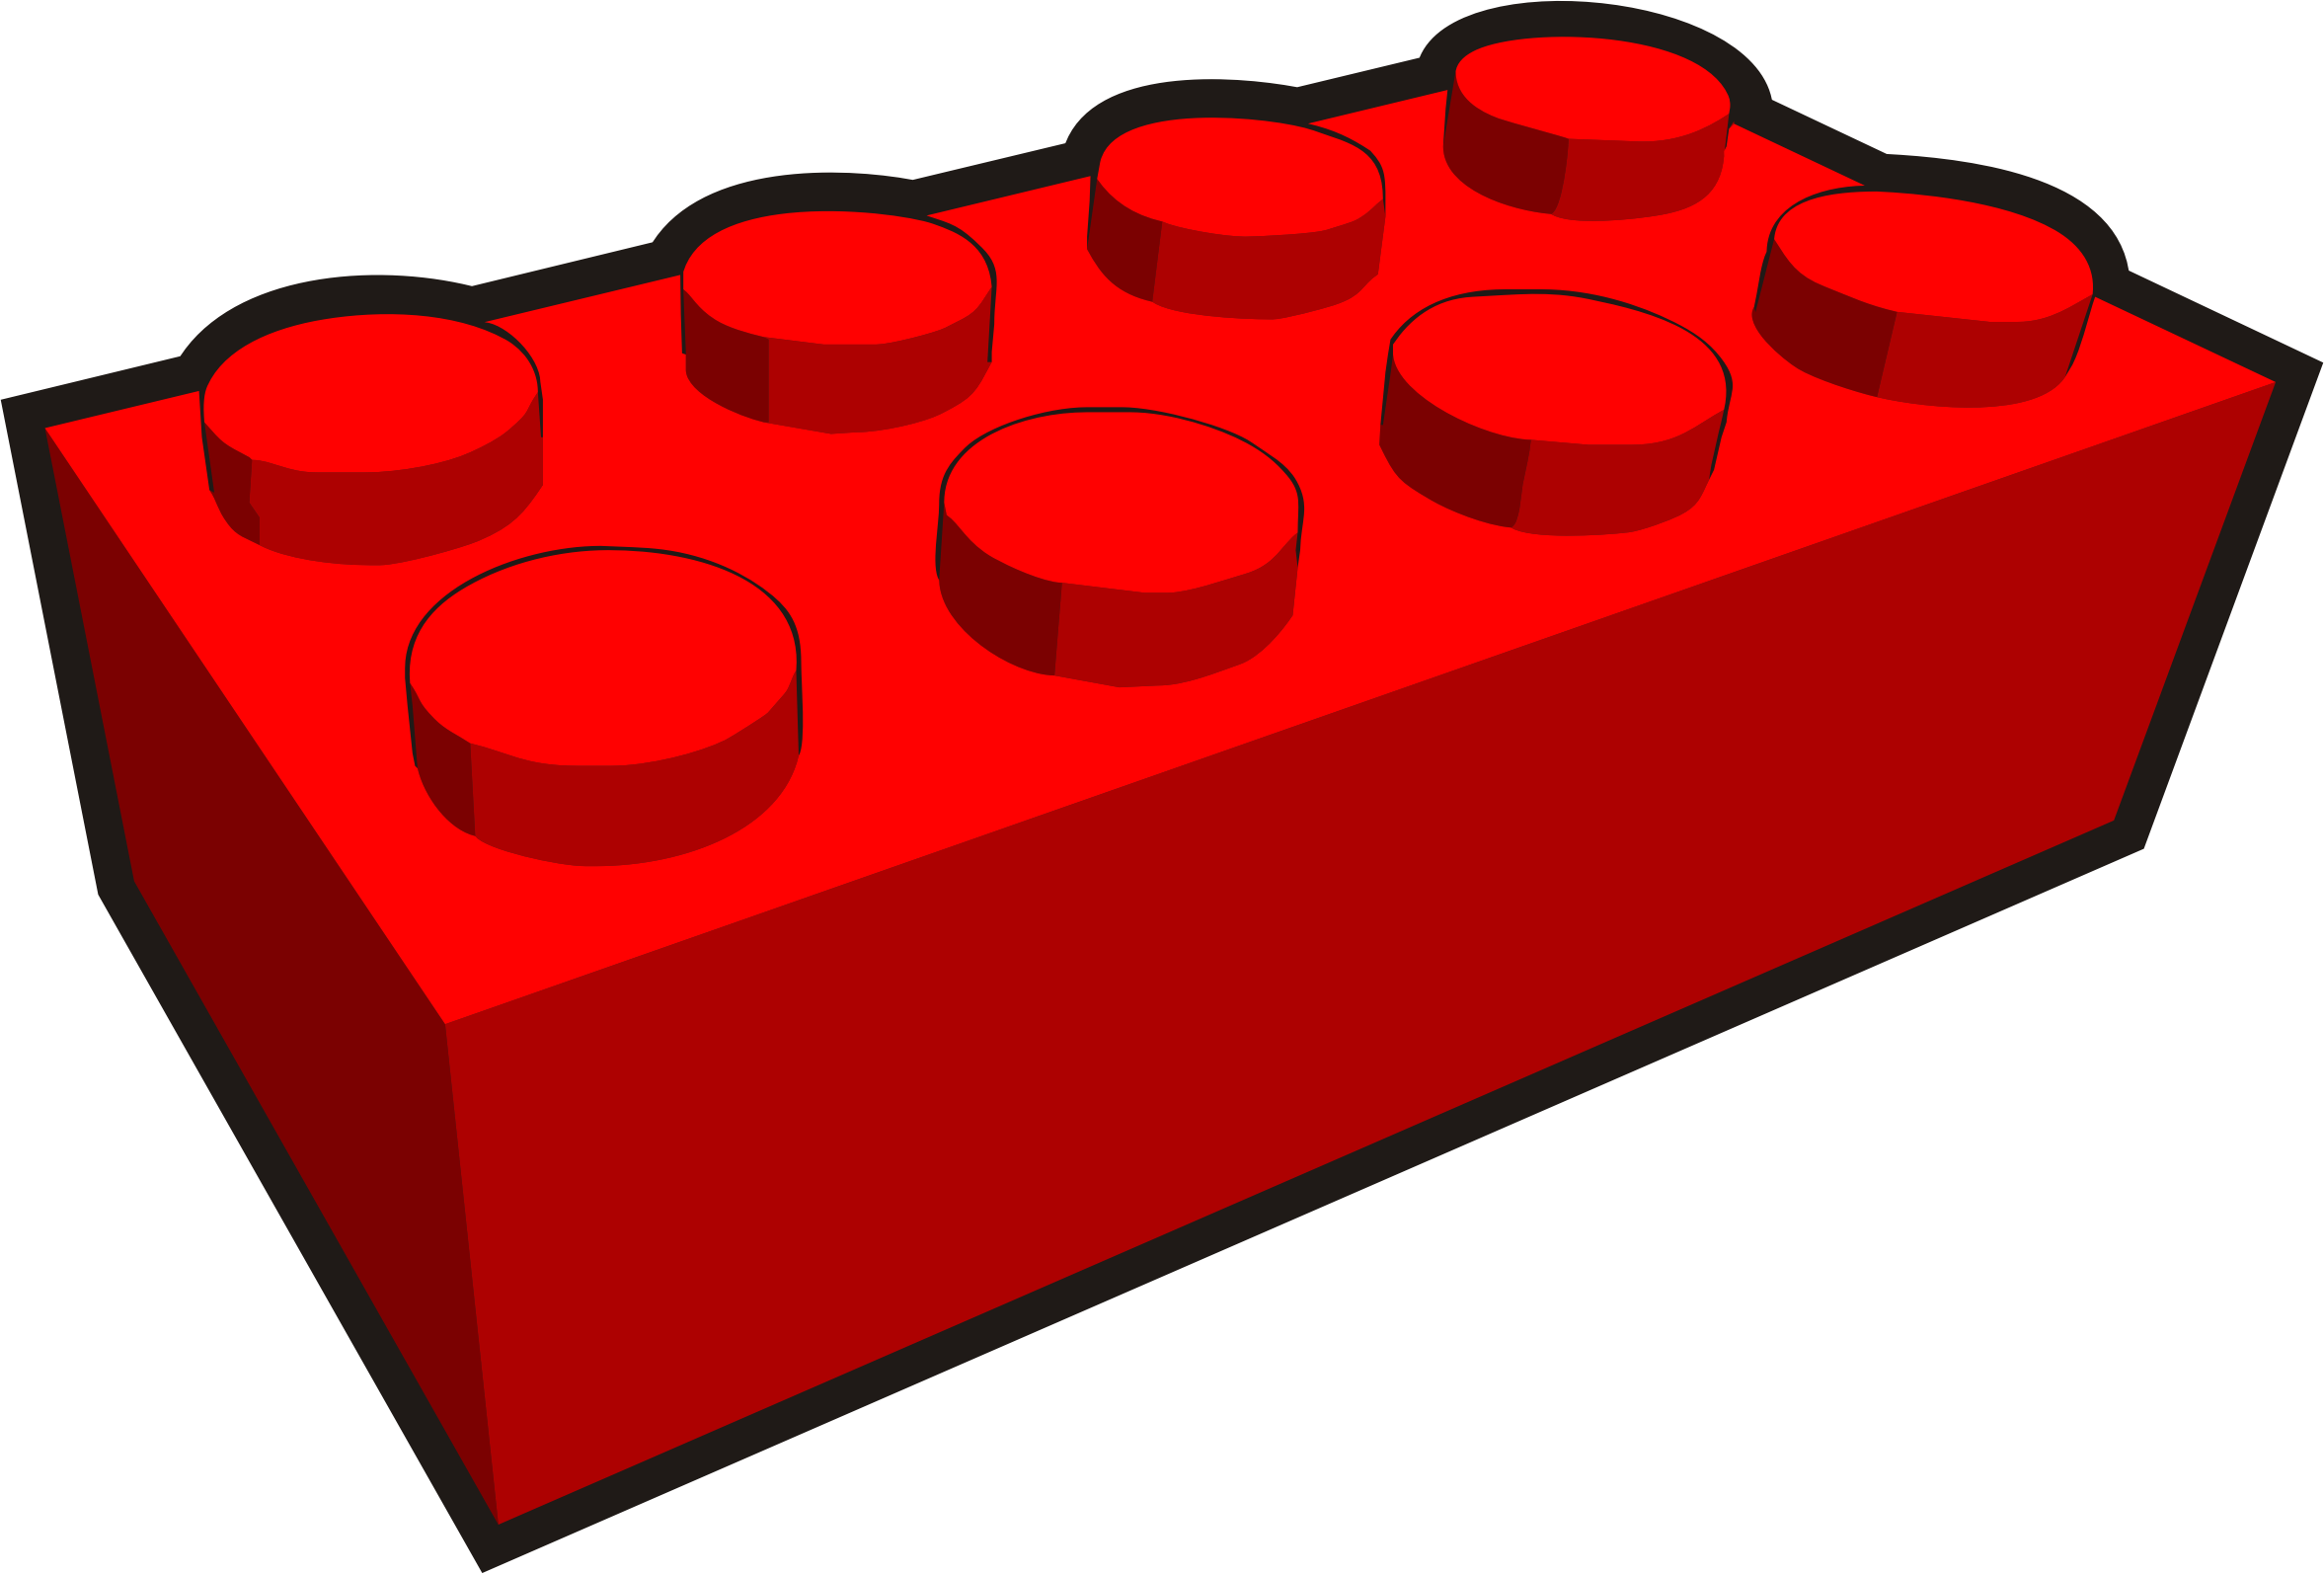 A Red Toy Block With Black Background